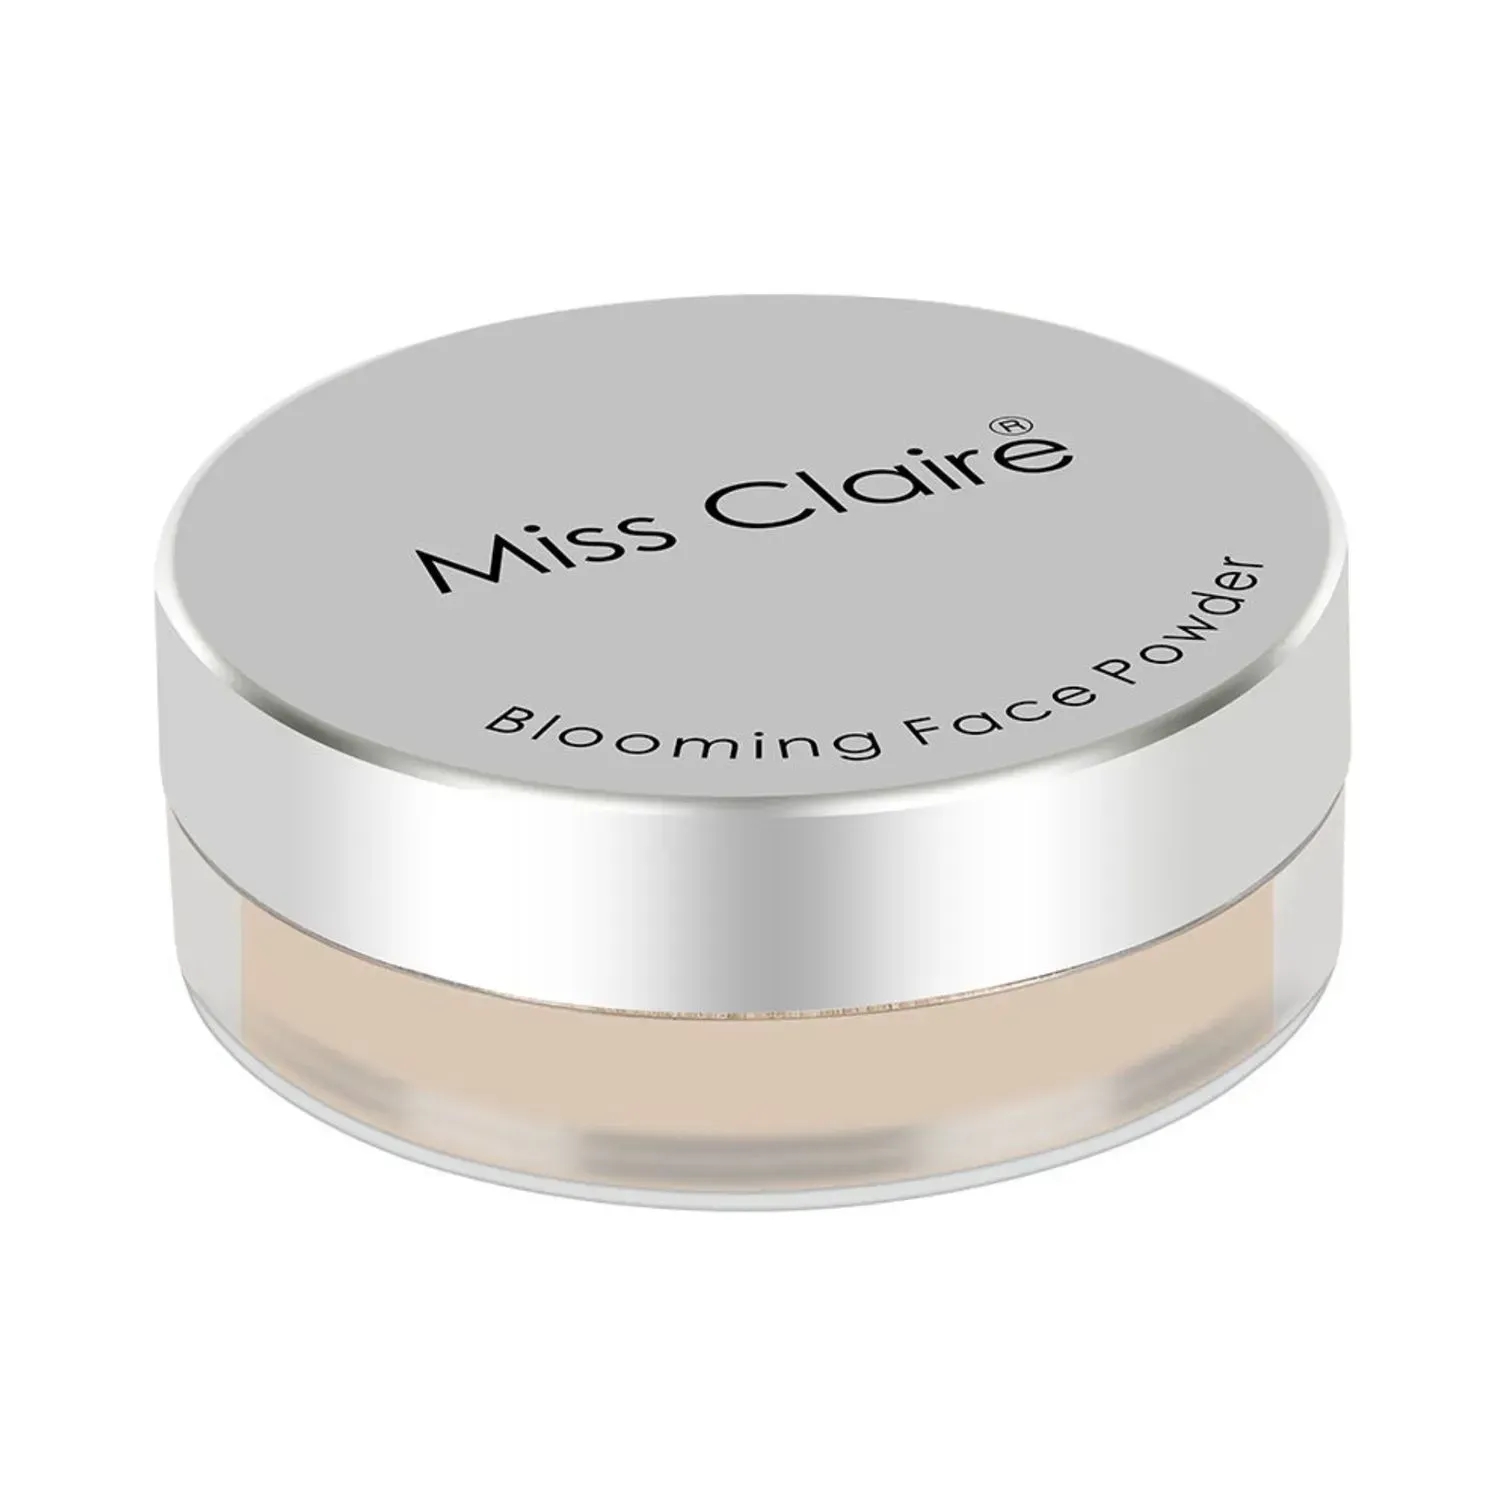 Miss Claire | Miss Claire Blooming Face Loose Powder - 01 Translucent (7g)